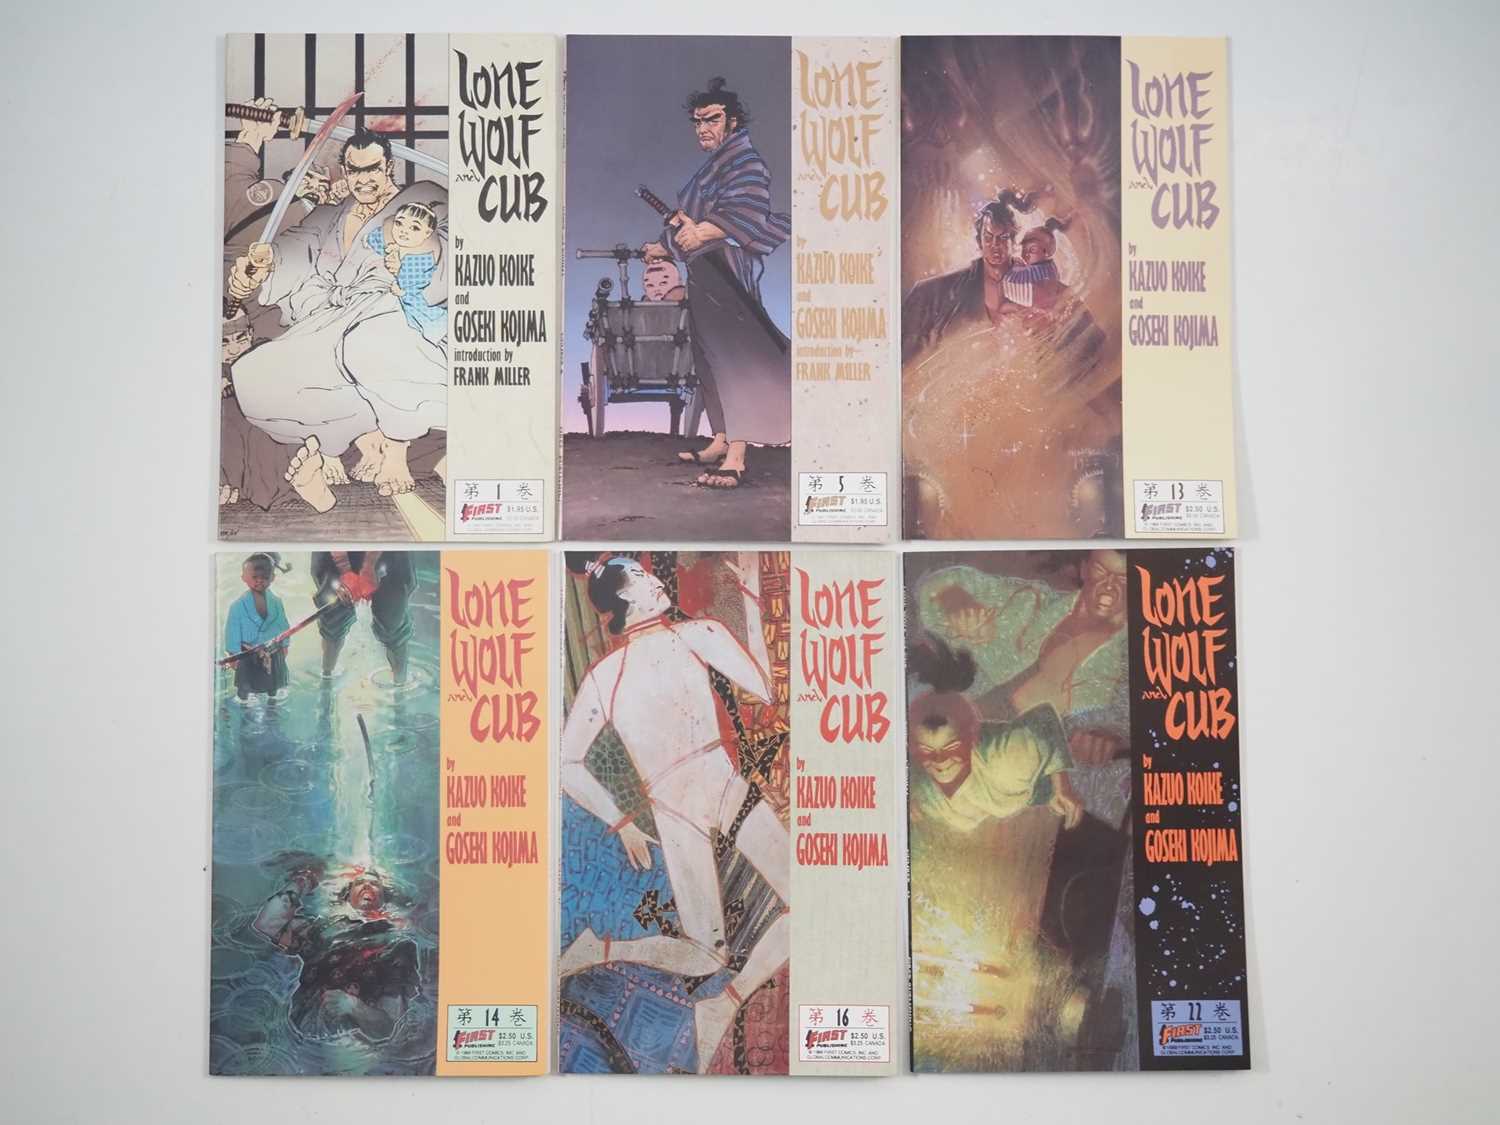 LONE WOLF AND CUB #1, 5, 13, 14, 16, 22 (6 in Lot) - (1987/1989 - FIRST PUBLISHING) - Includes the